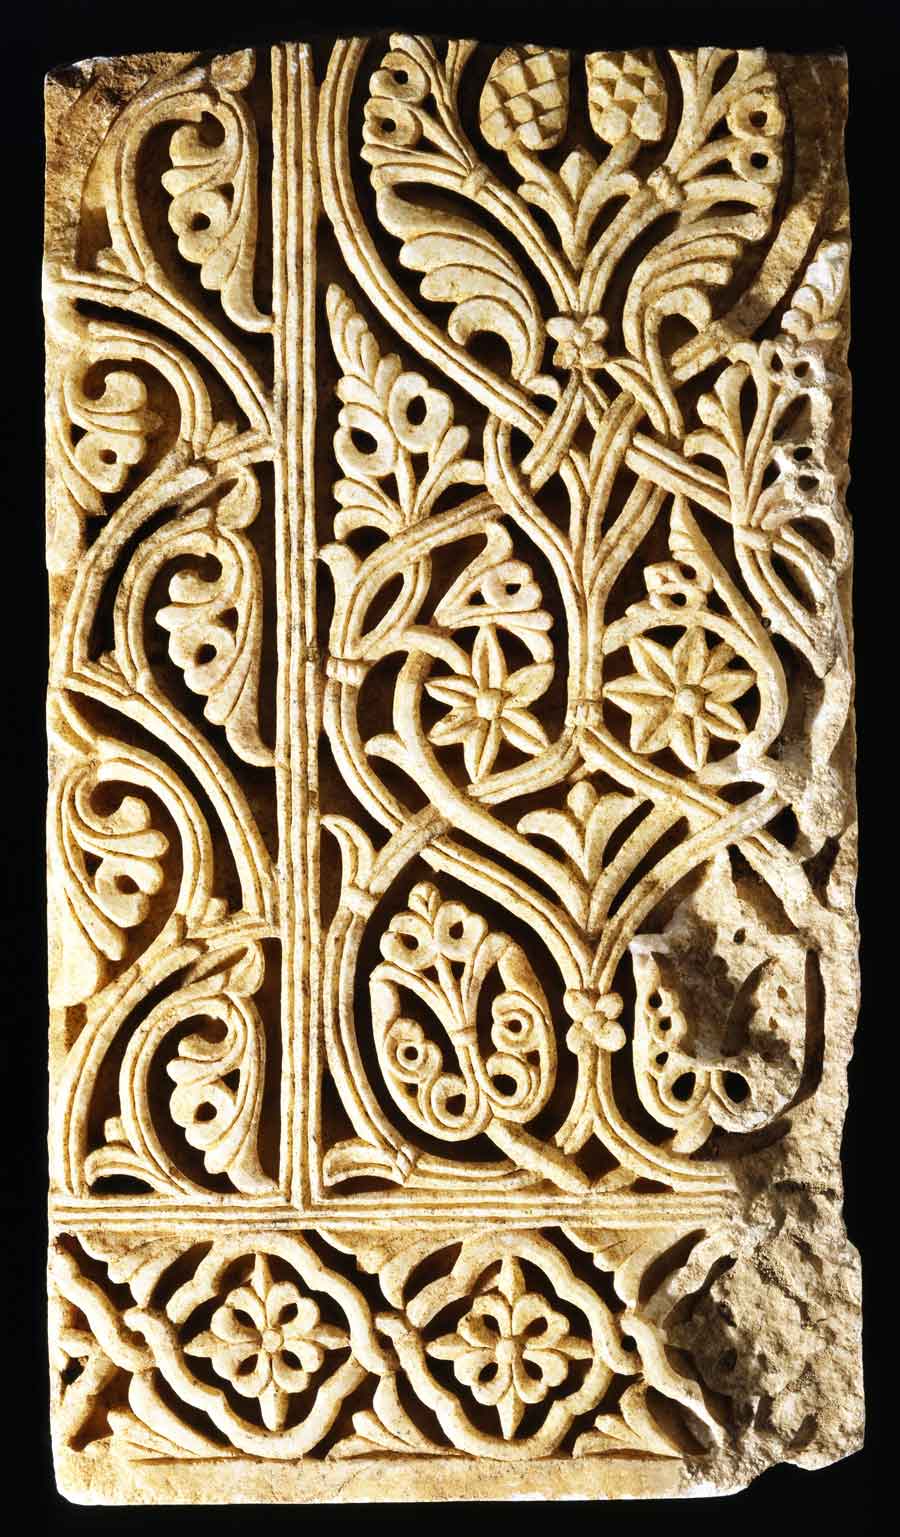 Marble relief, Spain, Cordoba; 2nd half of 10th century The Spanish Umayyad dynasty, descended from the Syrian Umayyad caliphs, remained truer to the styles of Antiquity than the Abbasid caliphs in Baghdad. The Spanish Umayyads reached their zenith in the 10th century, when Cordoba and the palace city of Madinat al-Zahra were decorated magnificently. Innumerable capitals and reliefs like this one were created in a style that clearly originated in Antiquity yet heralded a new idiom. The tendency was the same throughout the Islamic world. The acanthus and vines of Antiquity were stylized and denaturalized, and symmetry triumphed at the expense of natural growth. This relief shows an incipient arabesque that in time would be further developed.